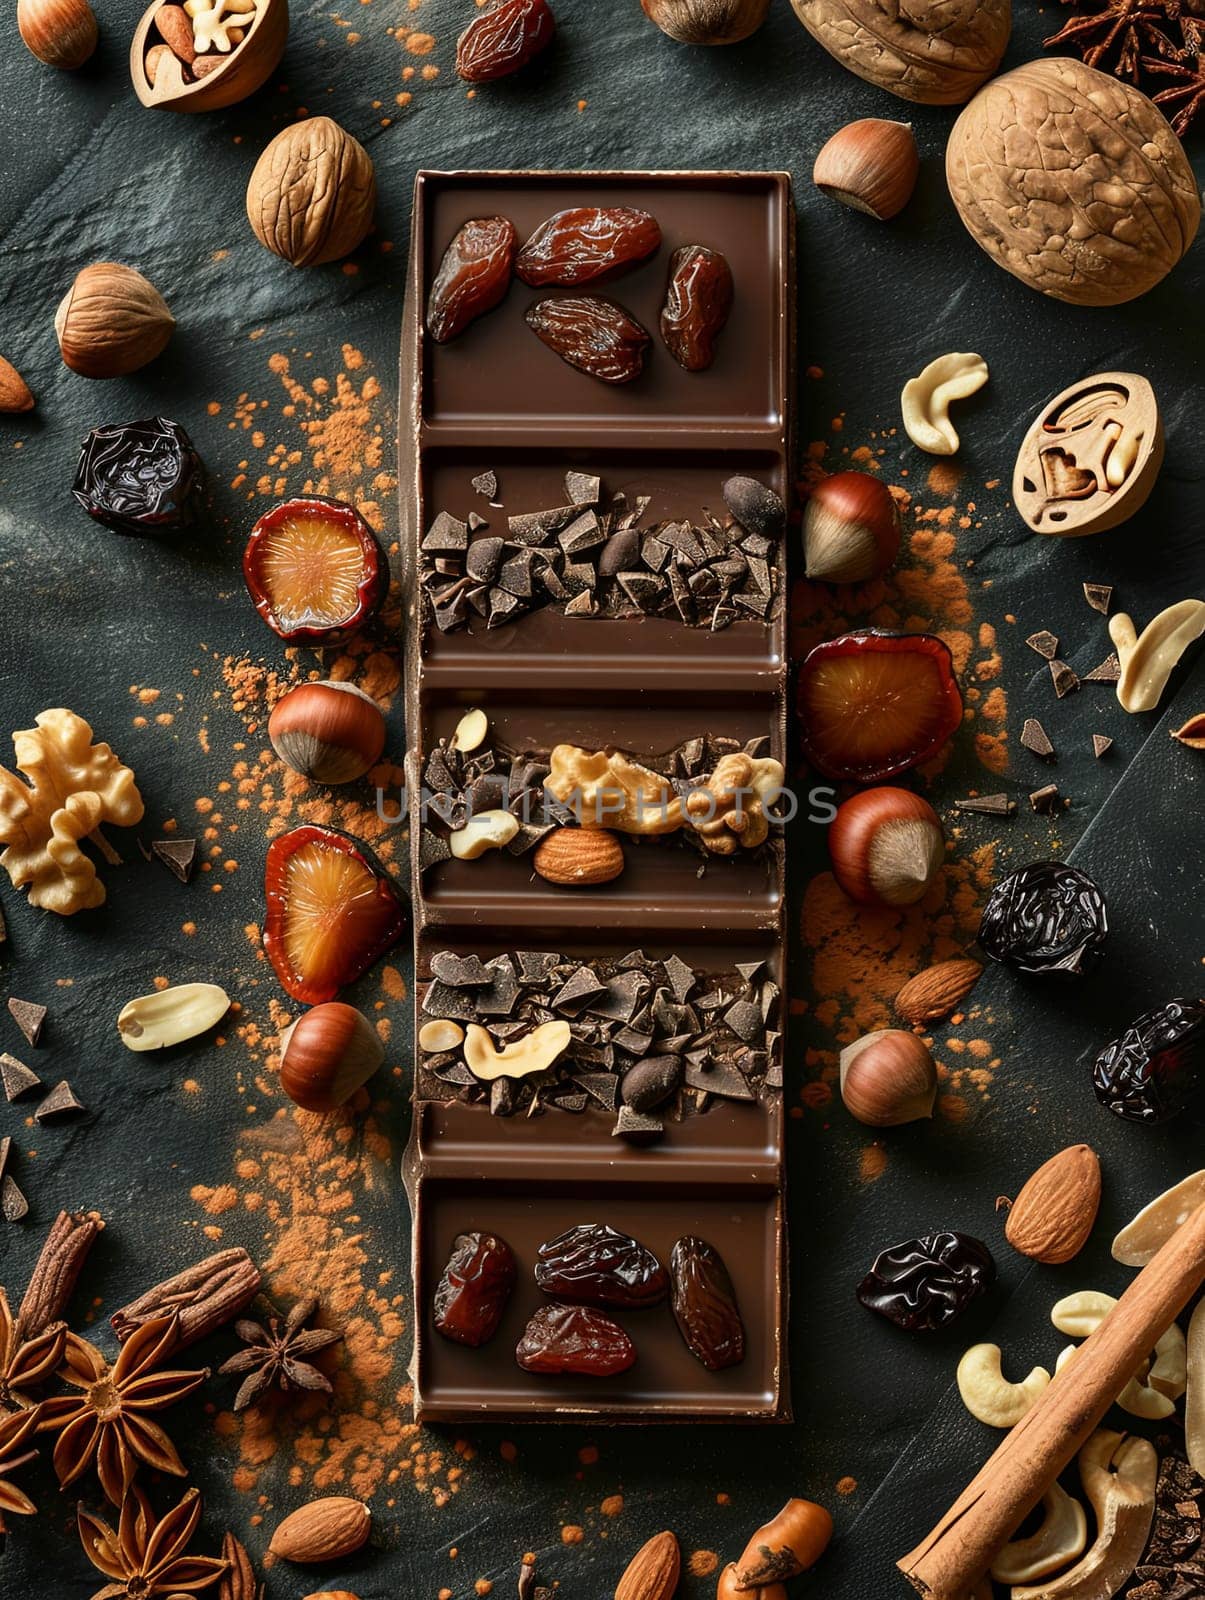 A chocolate bar surrounded by an assortment of nuts and dried fruits, showcasing rich textures and natural ingredients.